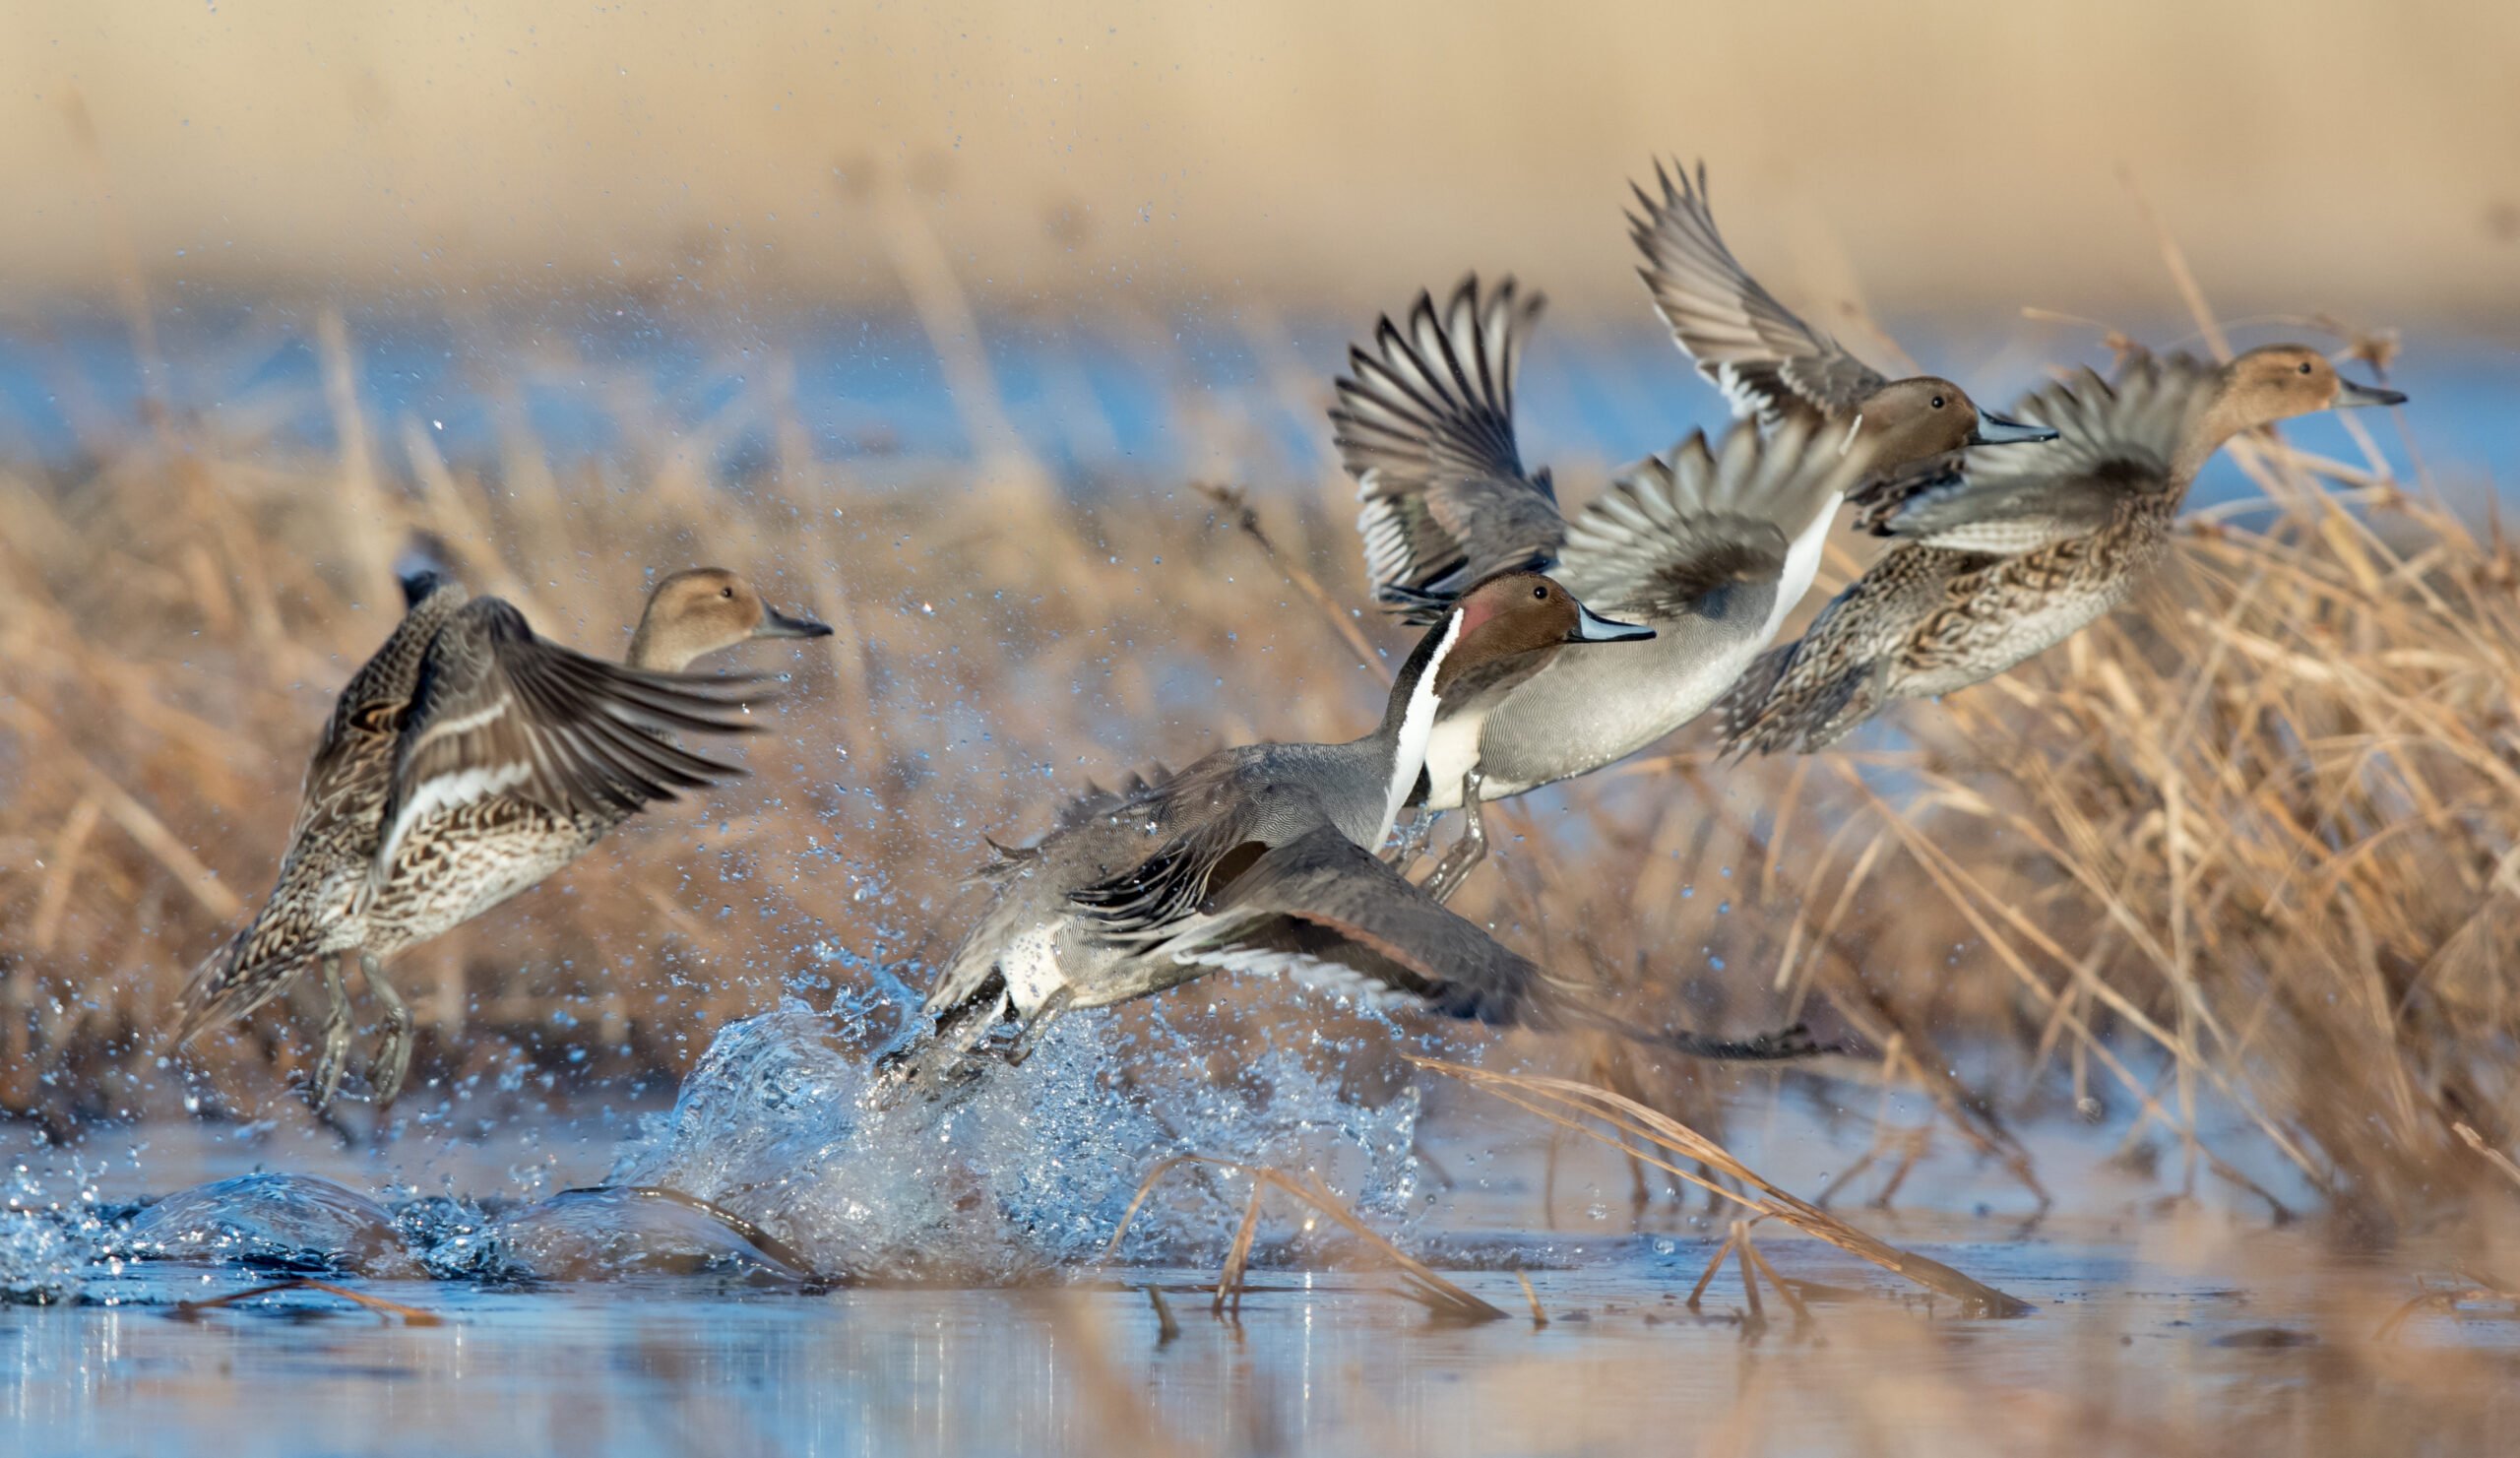 A group of pintails take flight in a marsh.